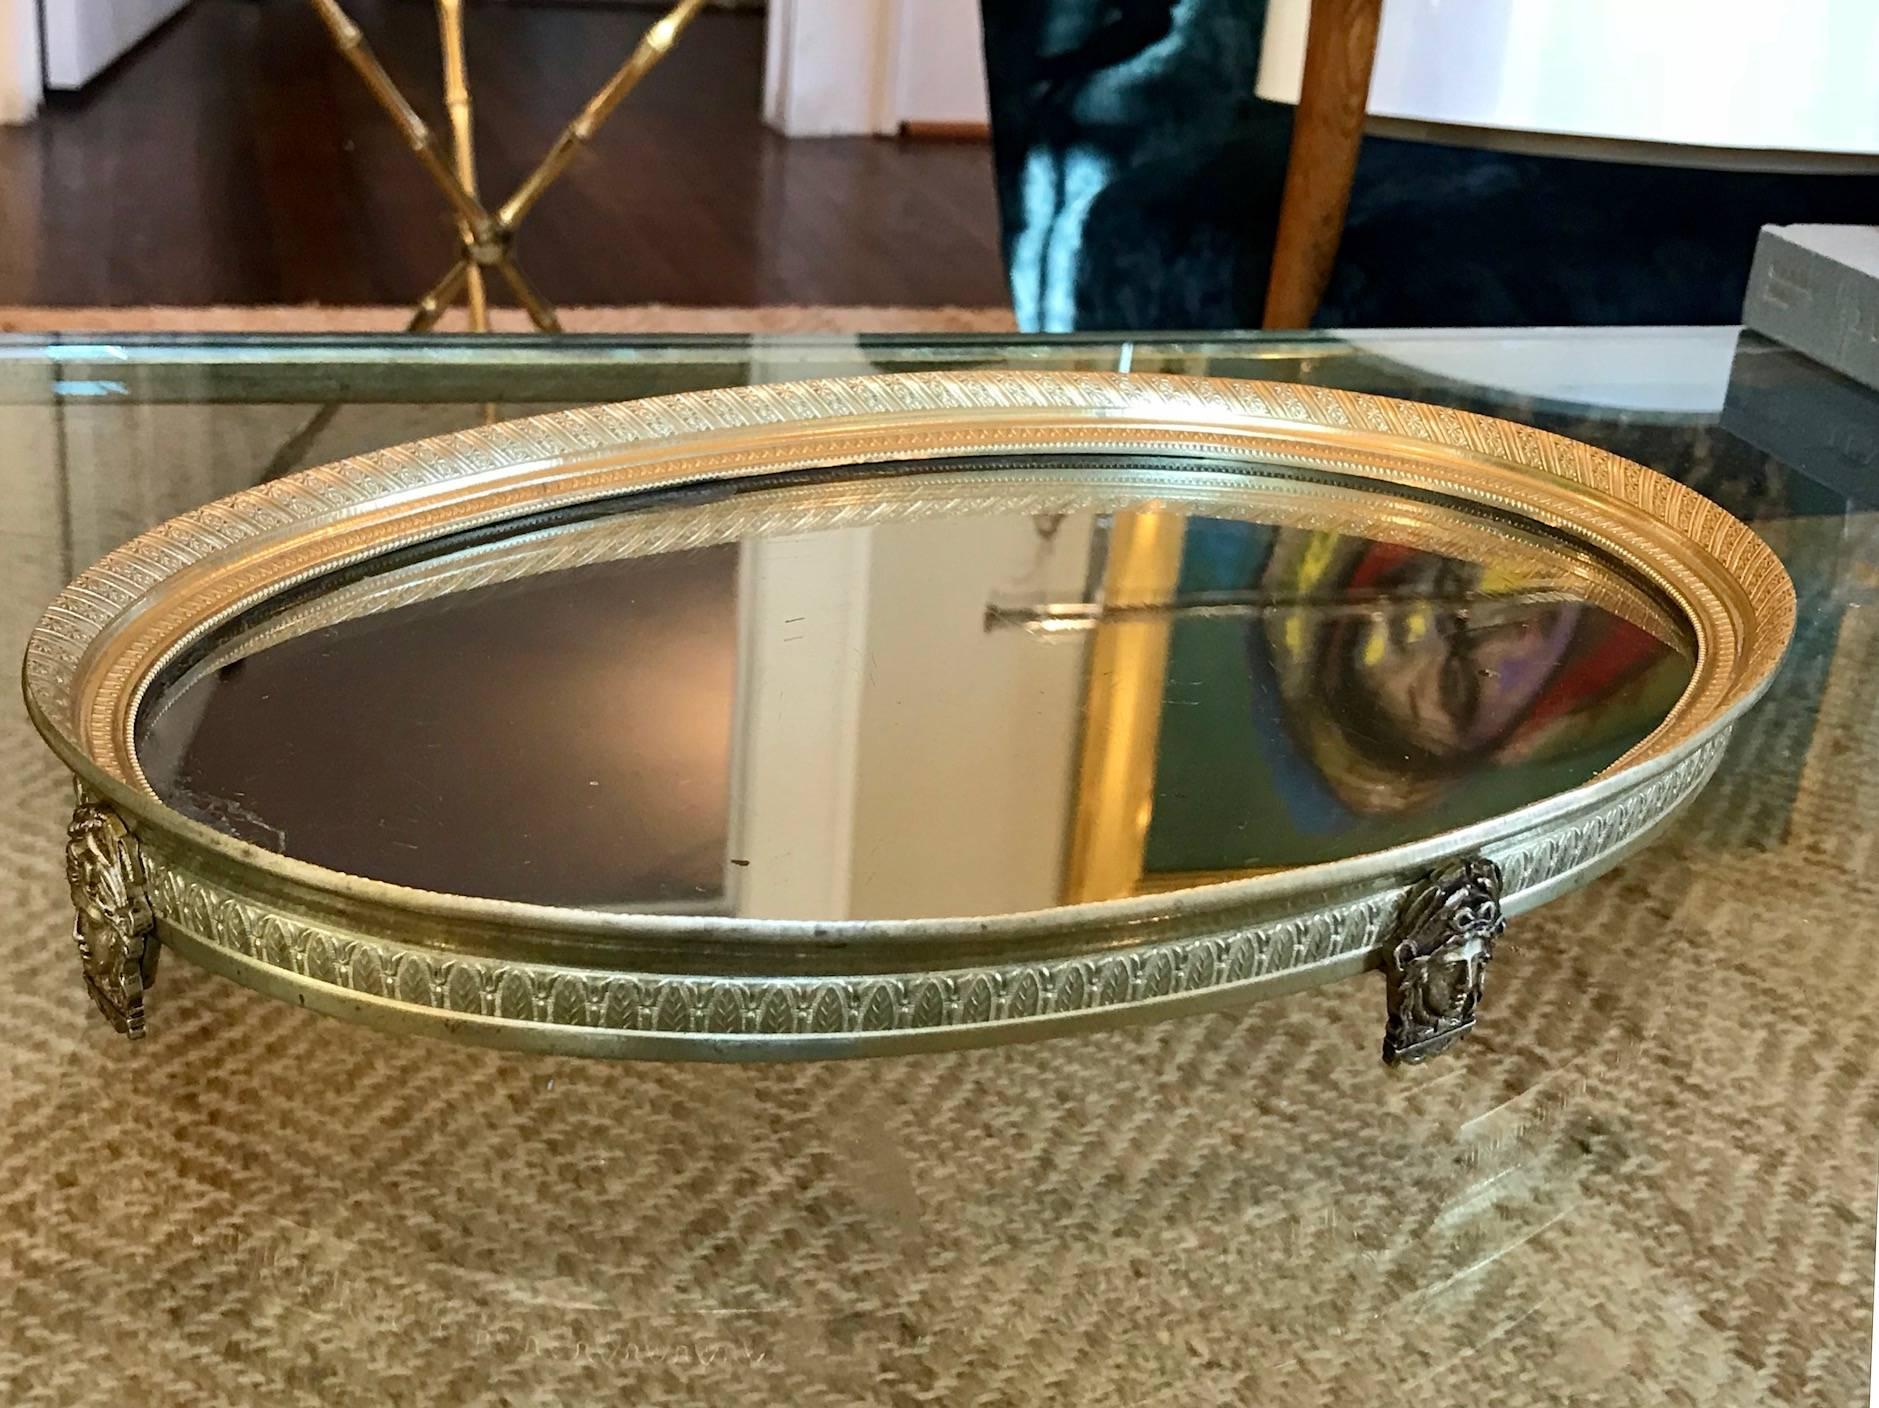 Beautifully detailed French Empire style plateau mirror or mirrored vanity tray. Interior of tray features rows of bead, acanthus and star motif patterns and acanthus motif to exterior, all being very crisp in detail. Four neoclassic faces in the